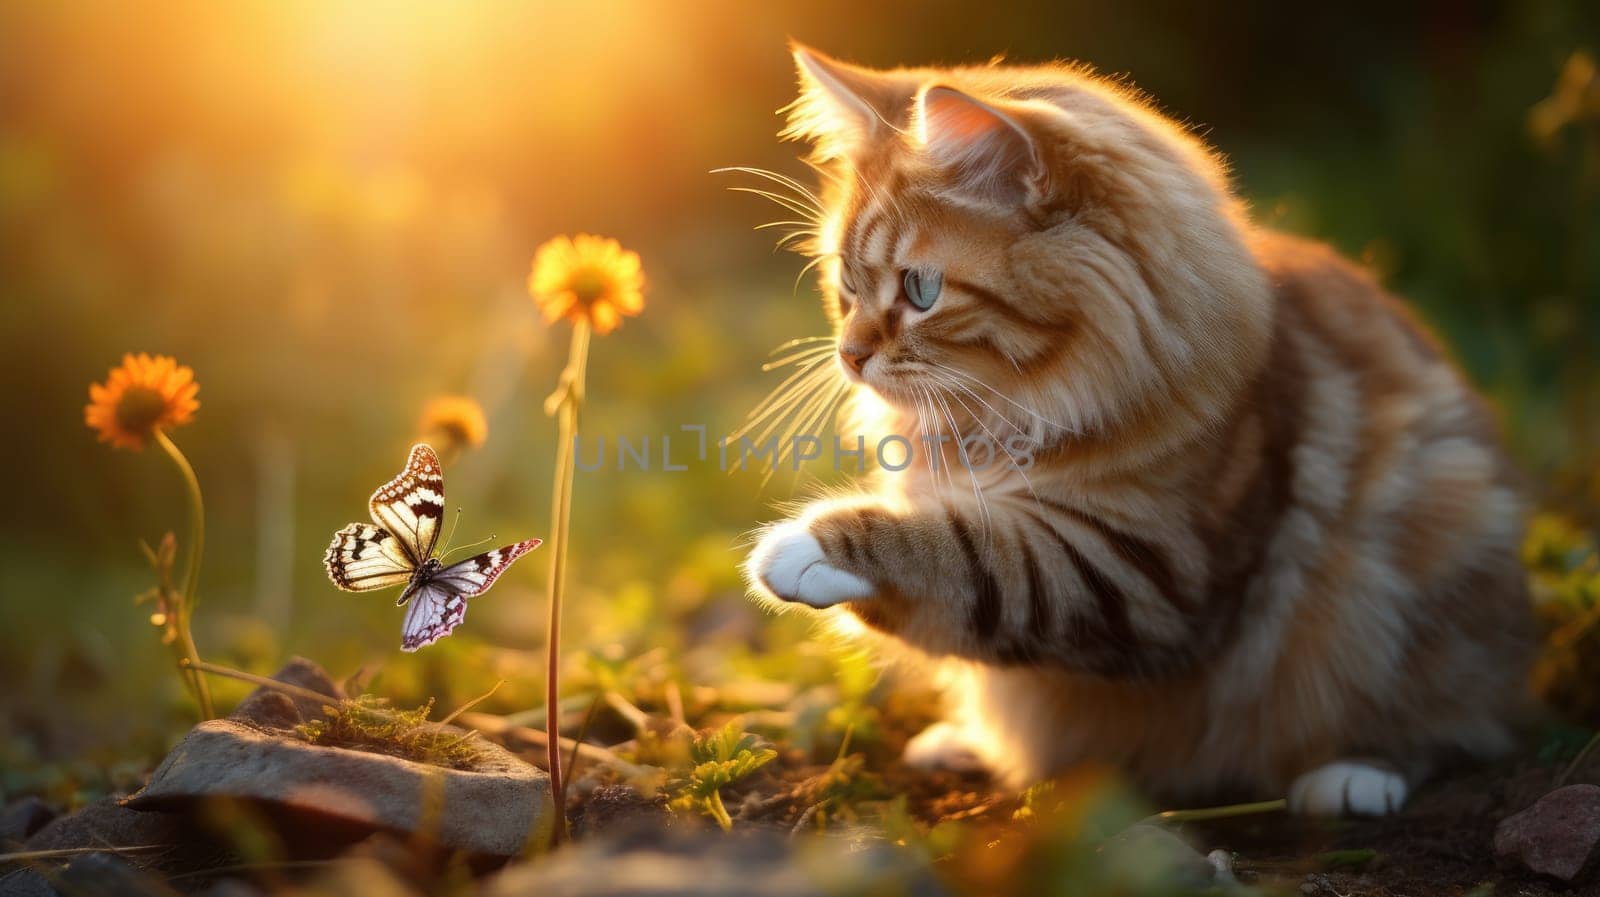 The cat catches a butterfly with its paw. Blurred sunny background. AI